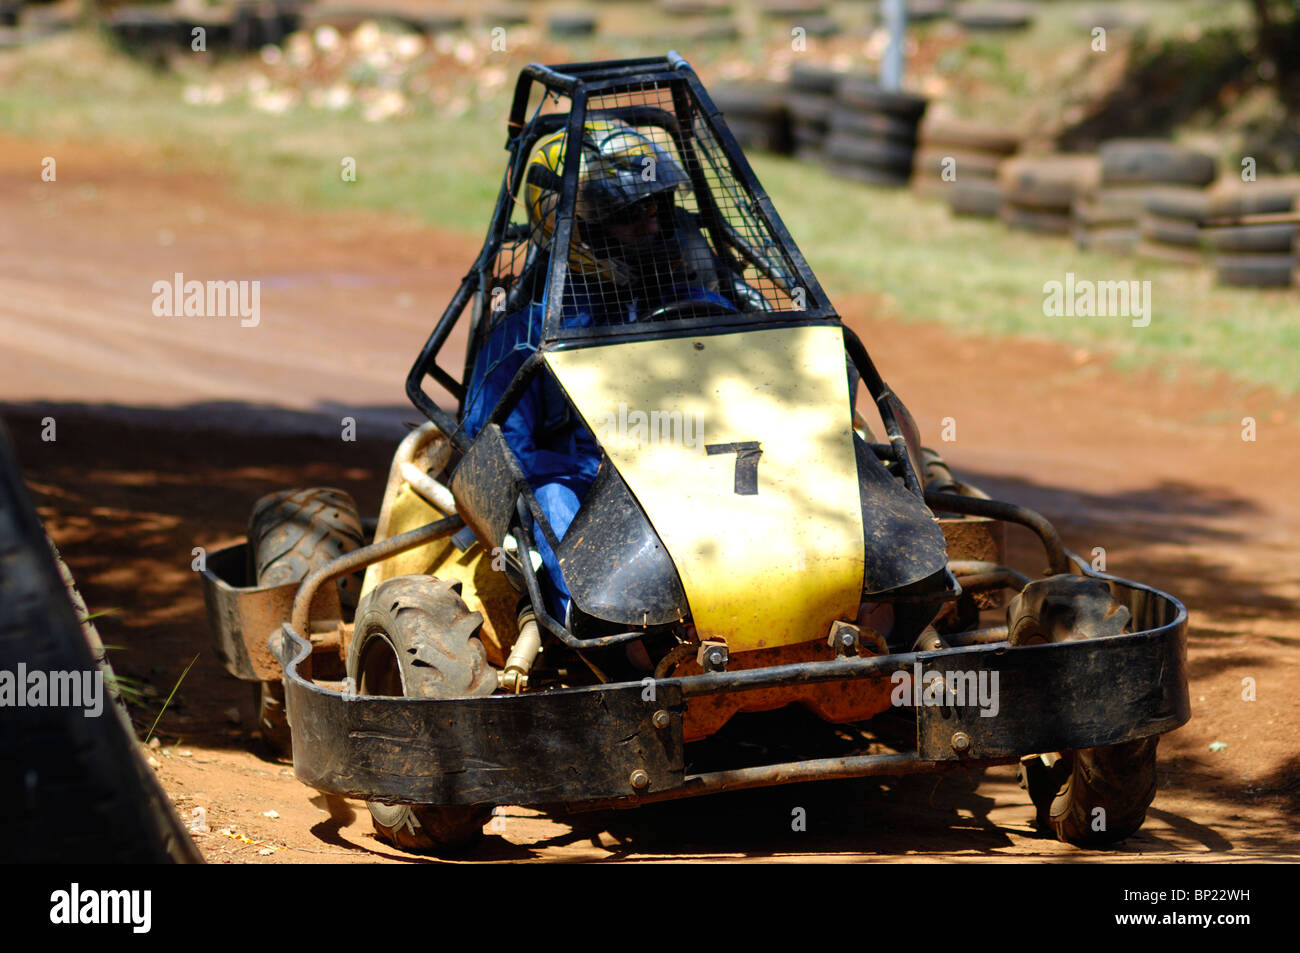 Male Adult driving a off road cart Stock Photo